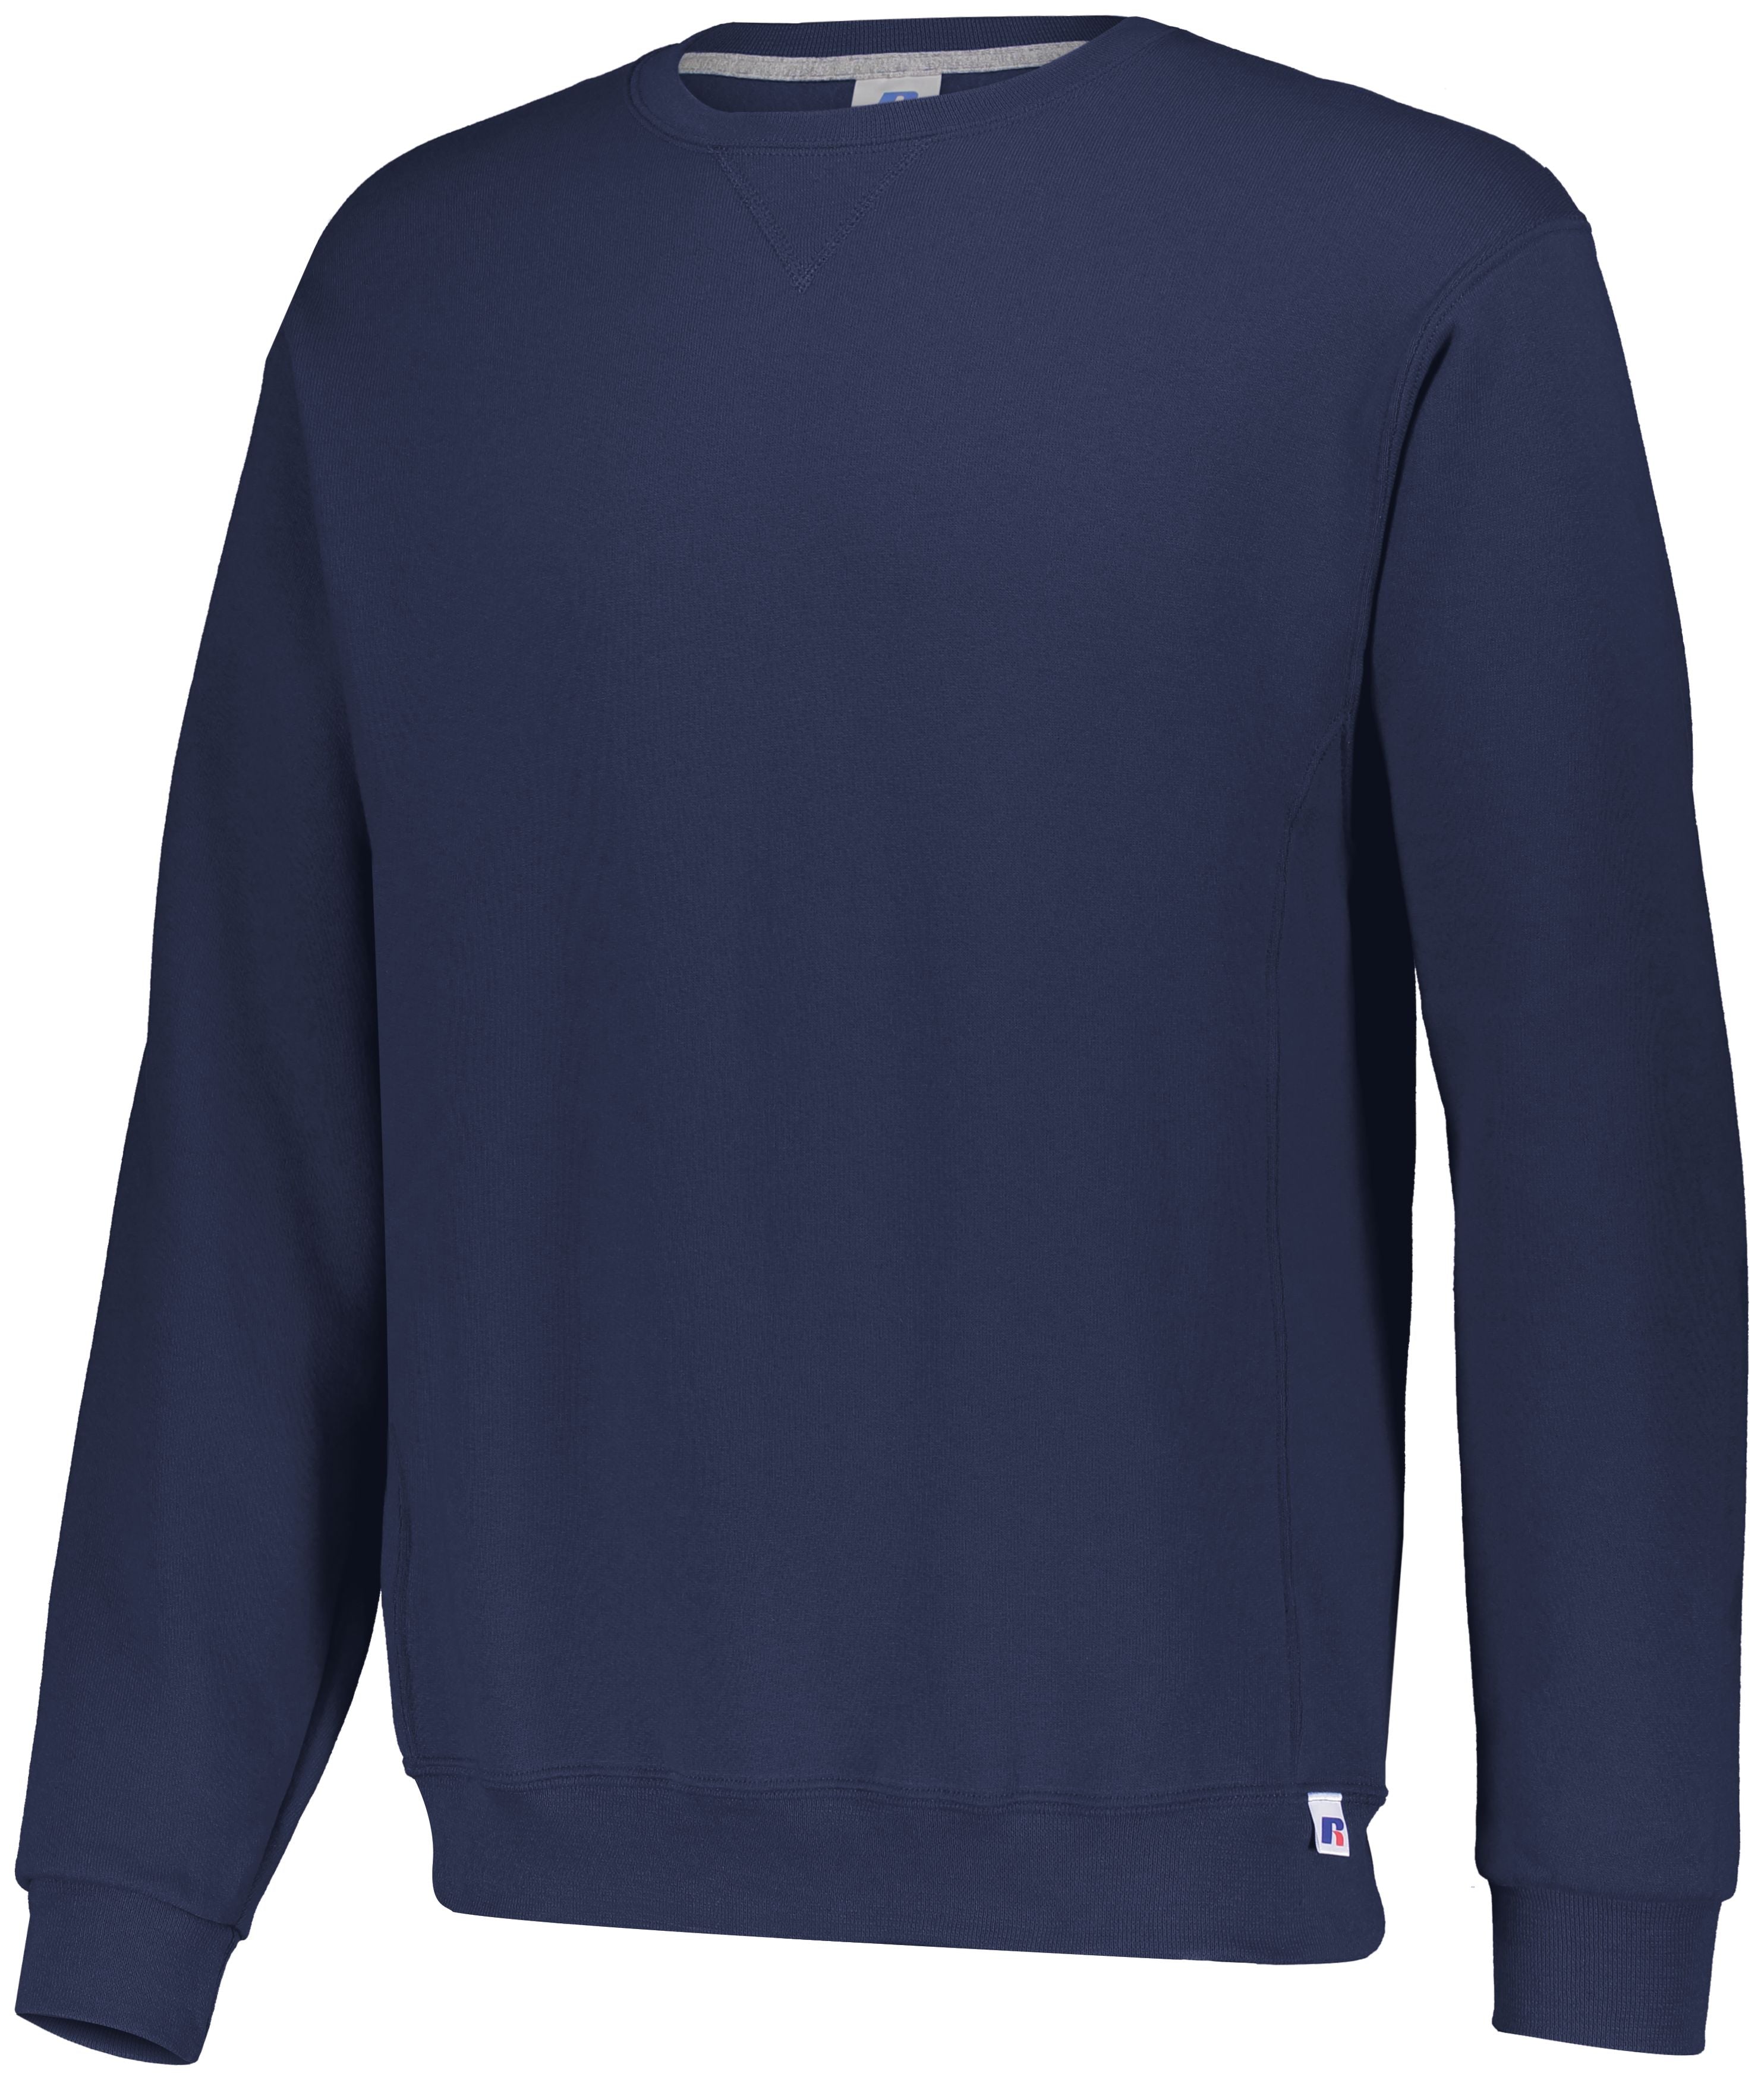 Russell Athletic Youth Dri-Power Fleece Crew Sweatshirt in J.Navy  -Part of the Youth, Youth-Sweatshirt, Russell-Athletic-Products, Outerwear product lines at KanaleyCreations.com